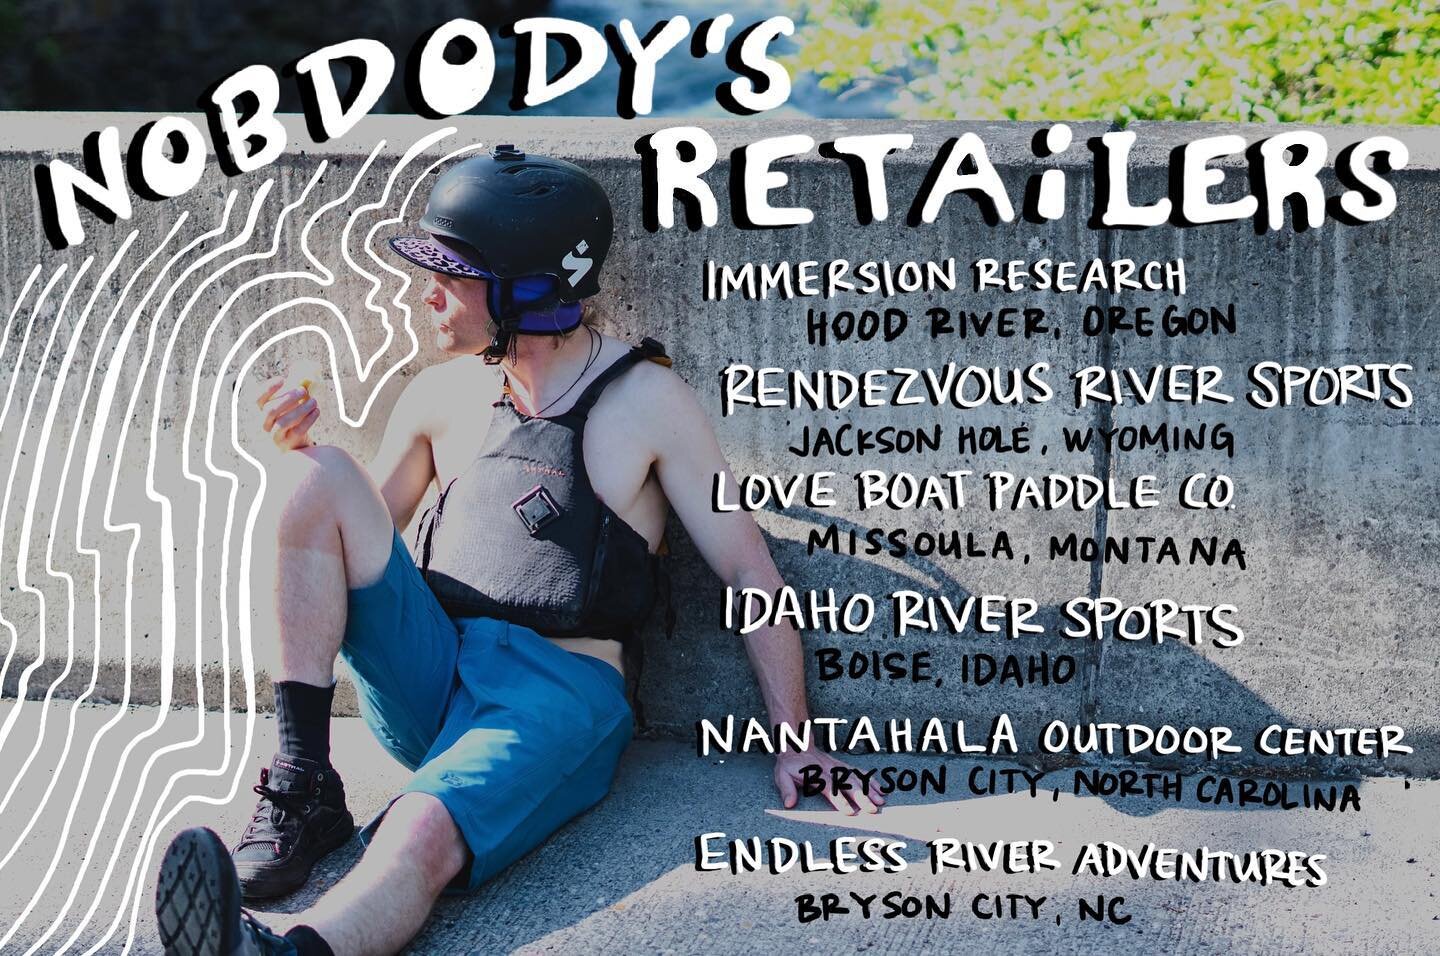 Huge thanks to our retailers for stocking Nobdody&rsquo;s across the country. 

Online sales are still ripping, but if you&rsquo;re local to any of these shops, show our brick and mortar friends some love!

@immersionresearch 
@rendezvousriversports 